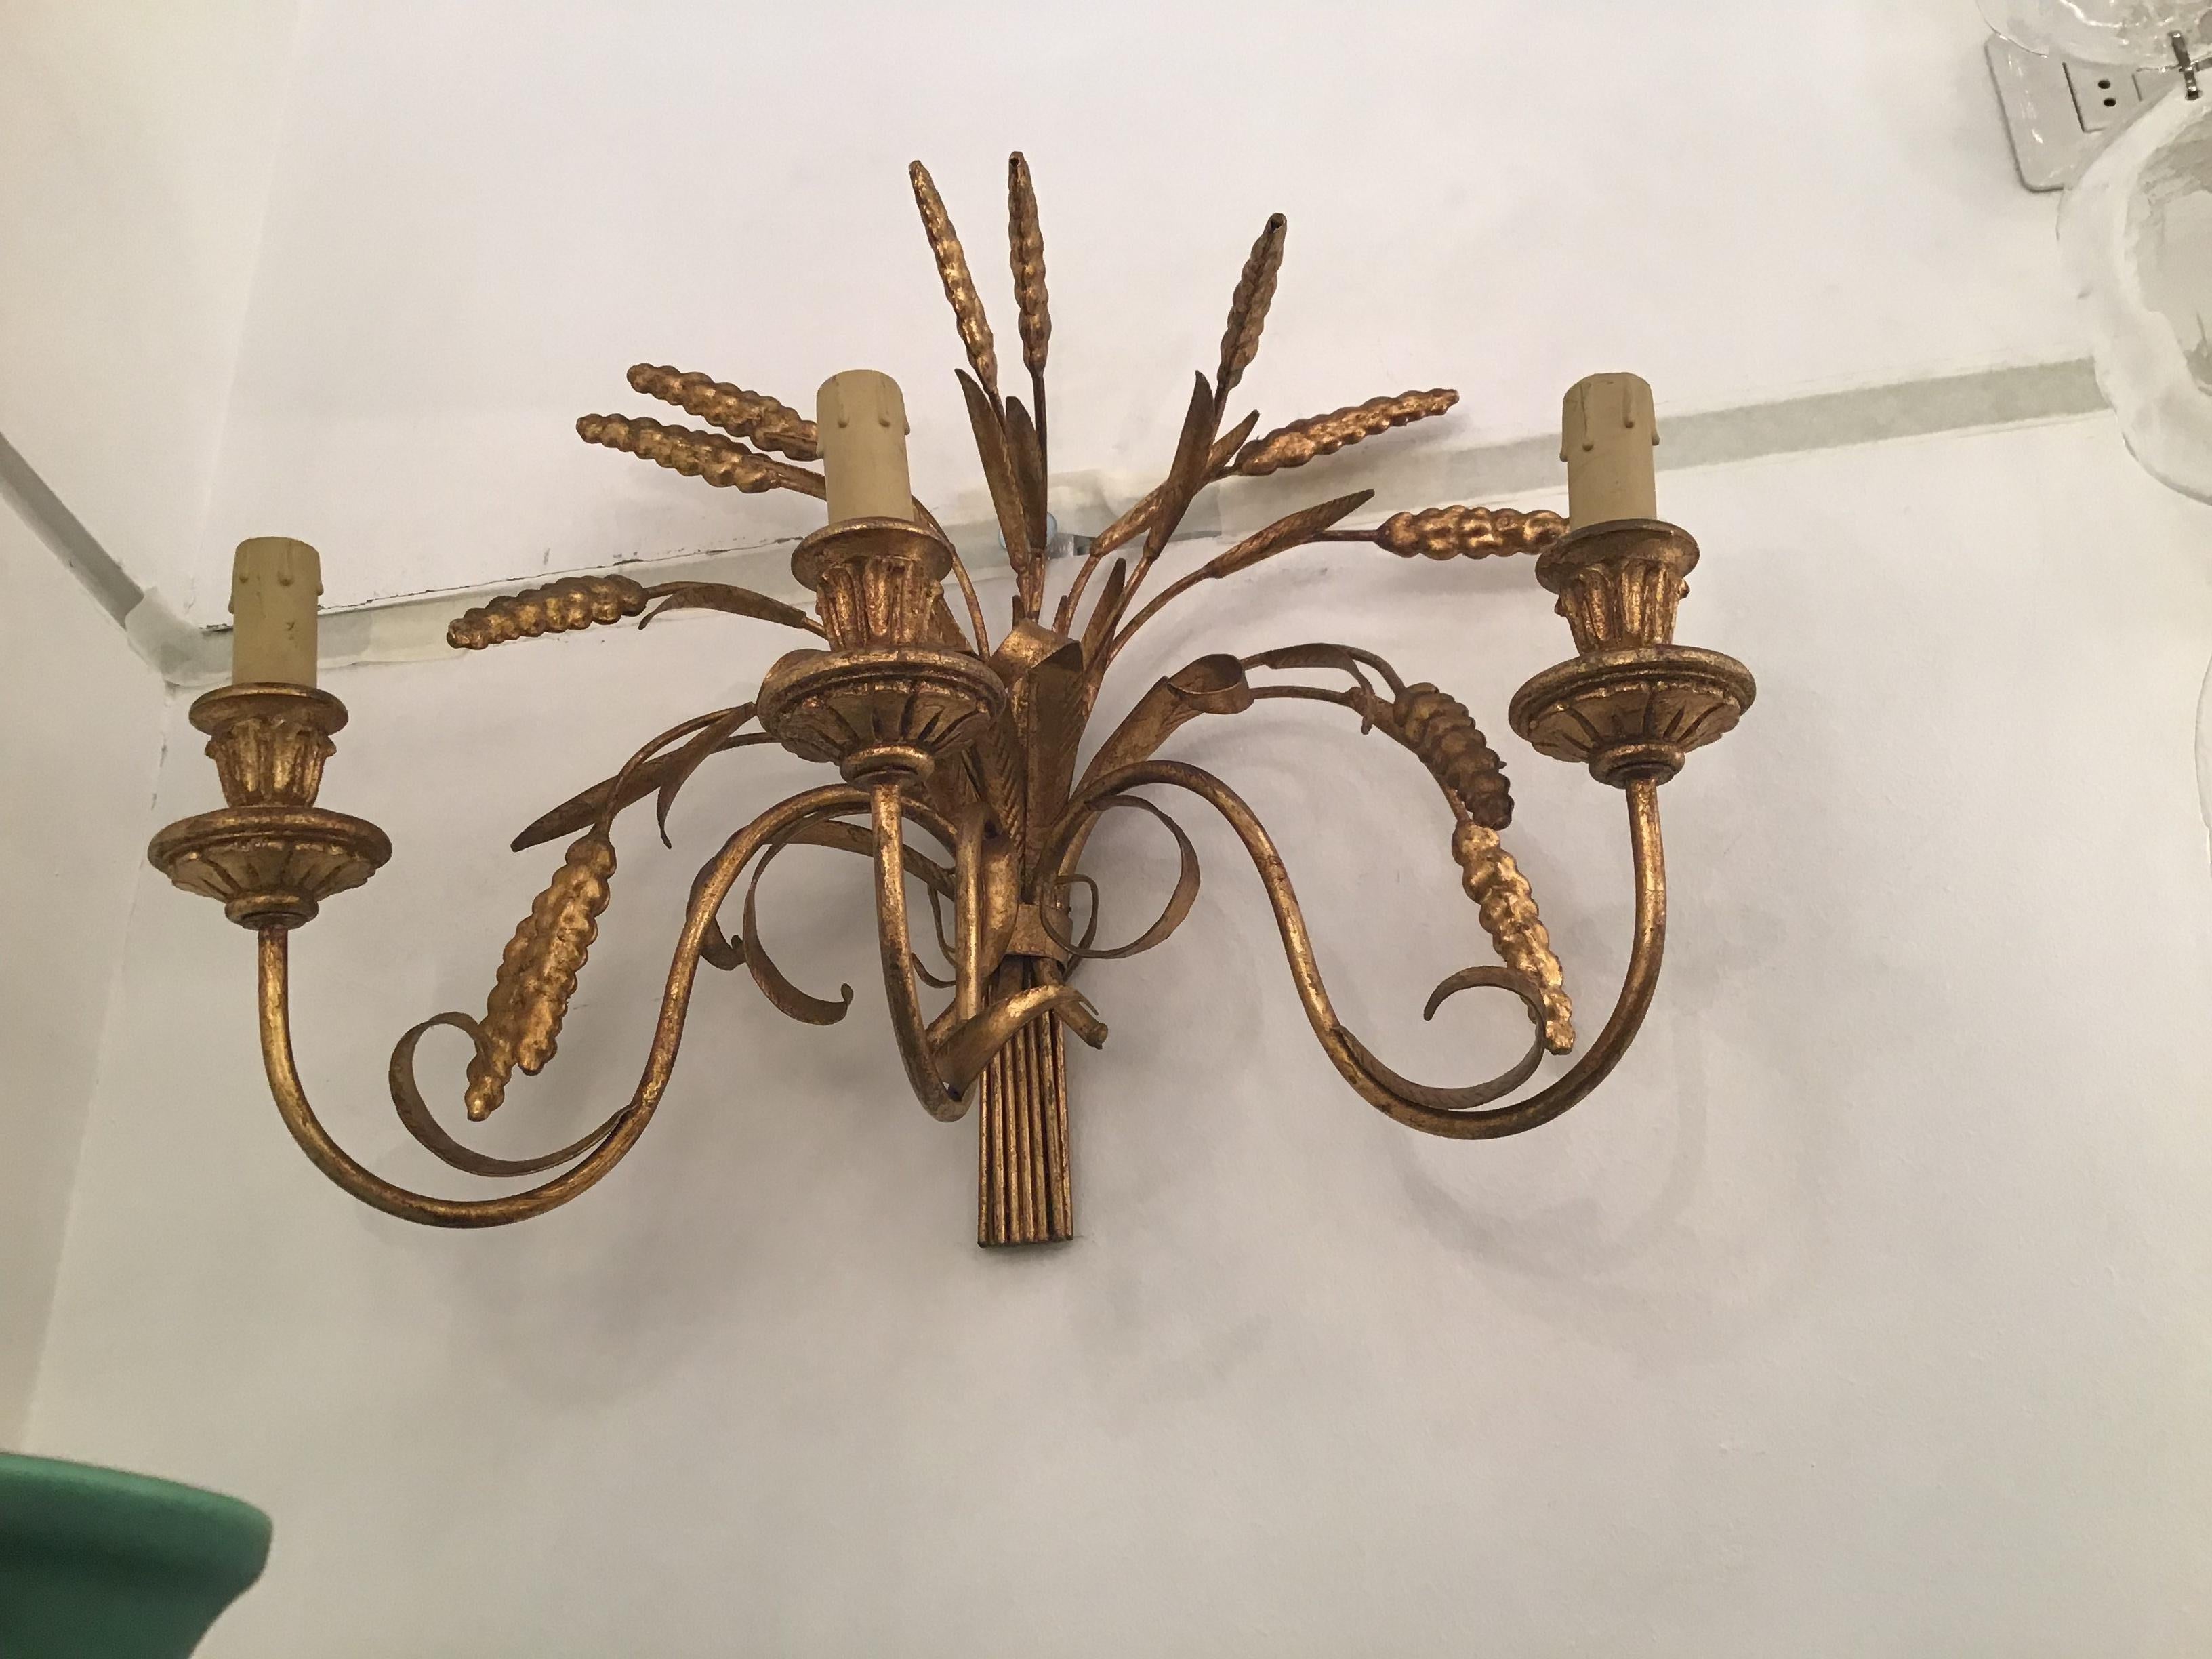 Coco Chanel “Fasce Di Grano” N 4 Sconces Golden Natural Iron In Good Condition For Sale In Milano, IT